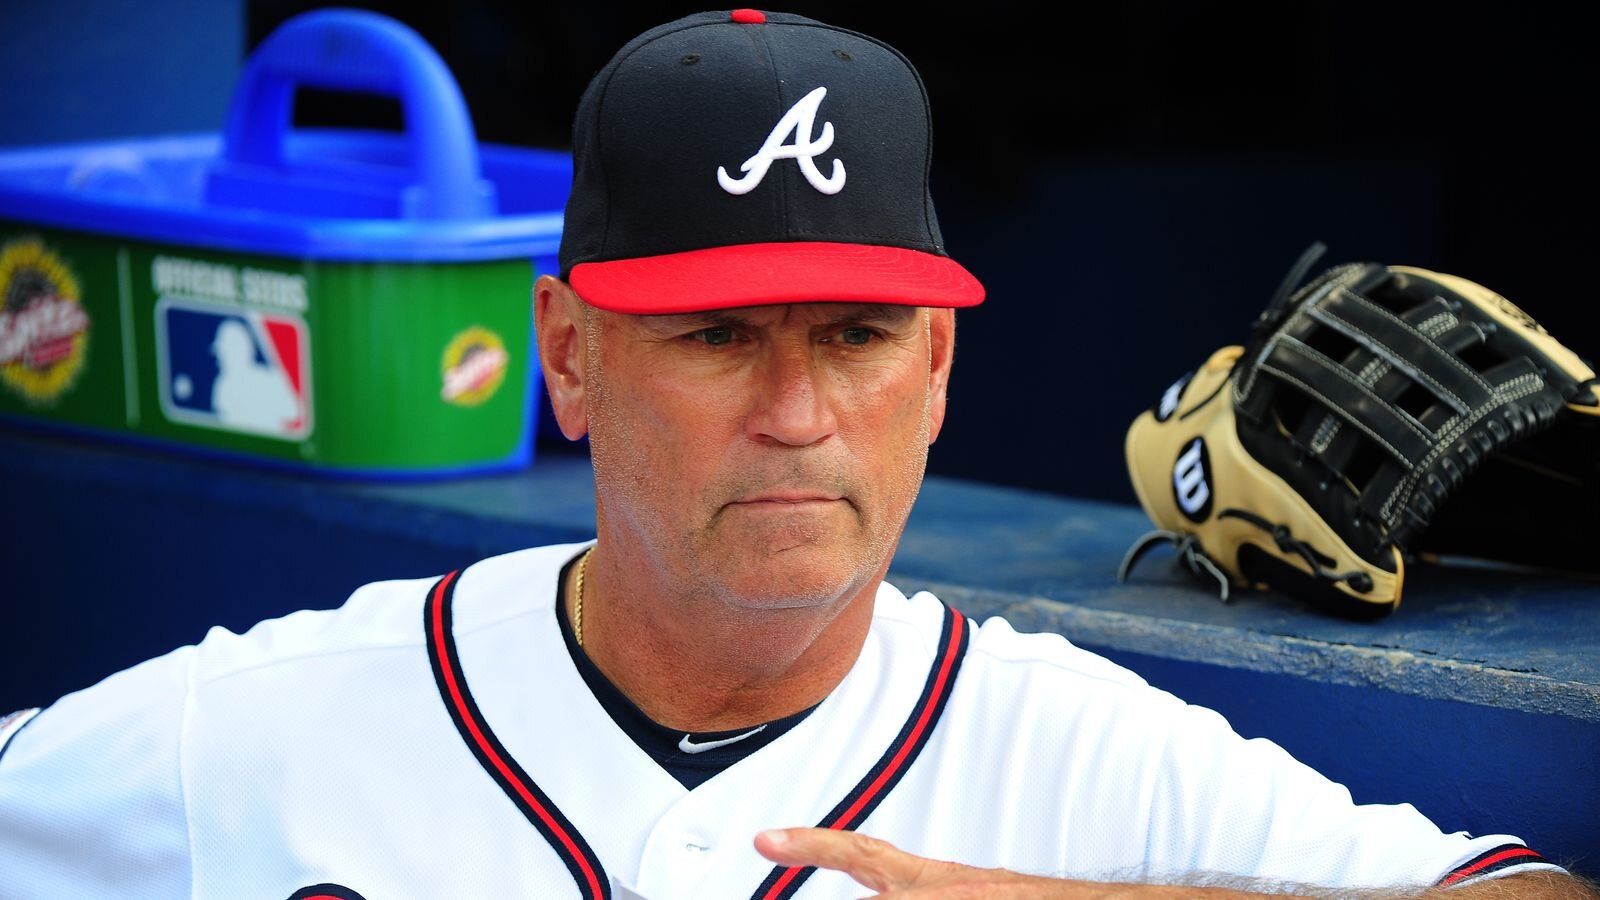 Report: Atlanta braves key player is out with injury and might not play again